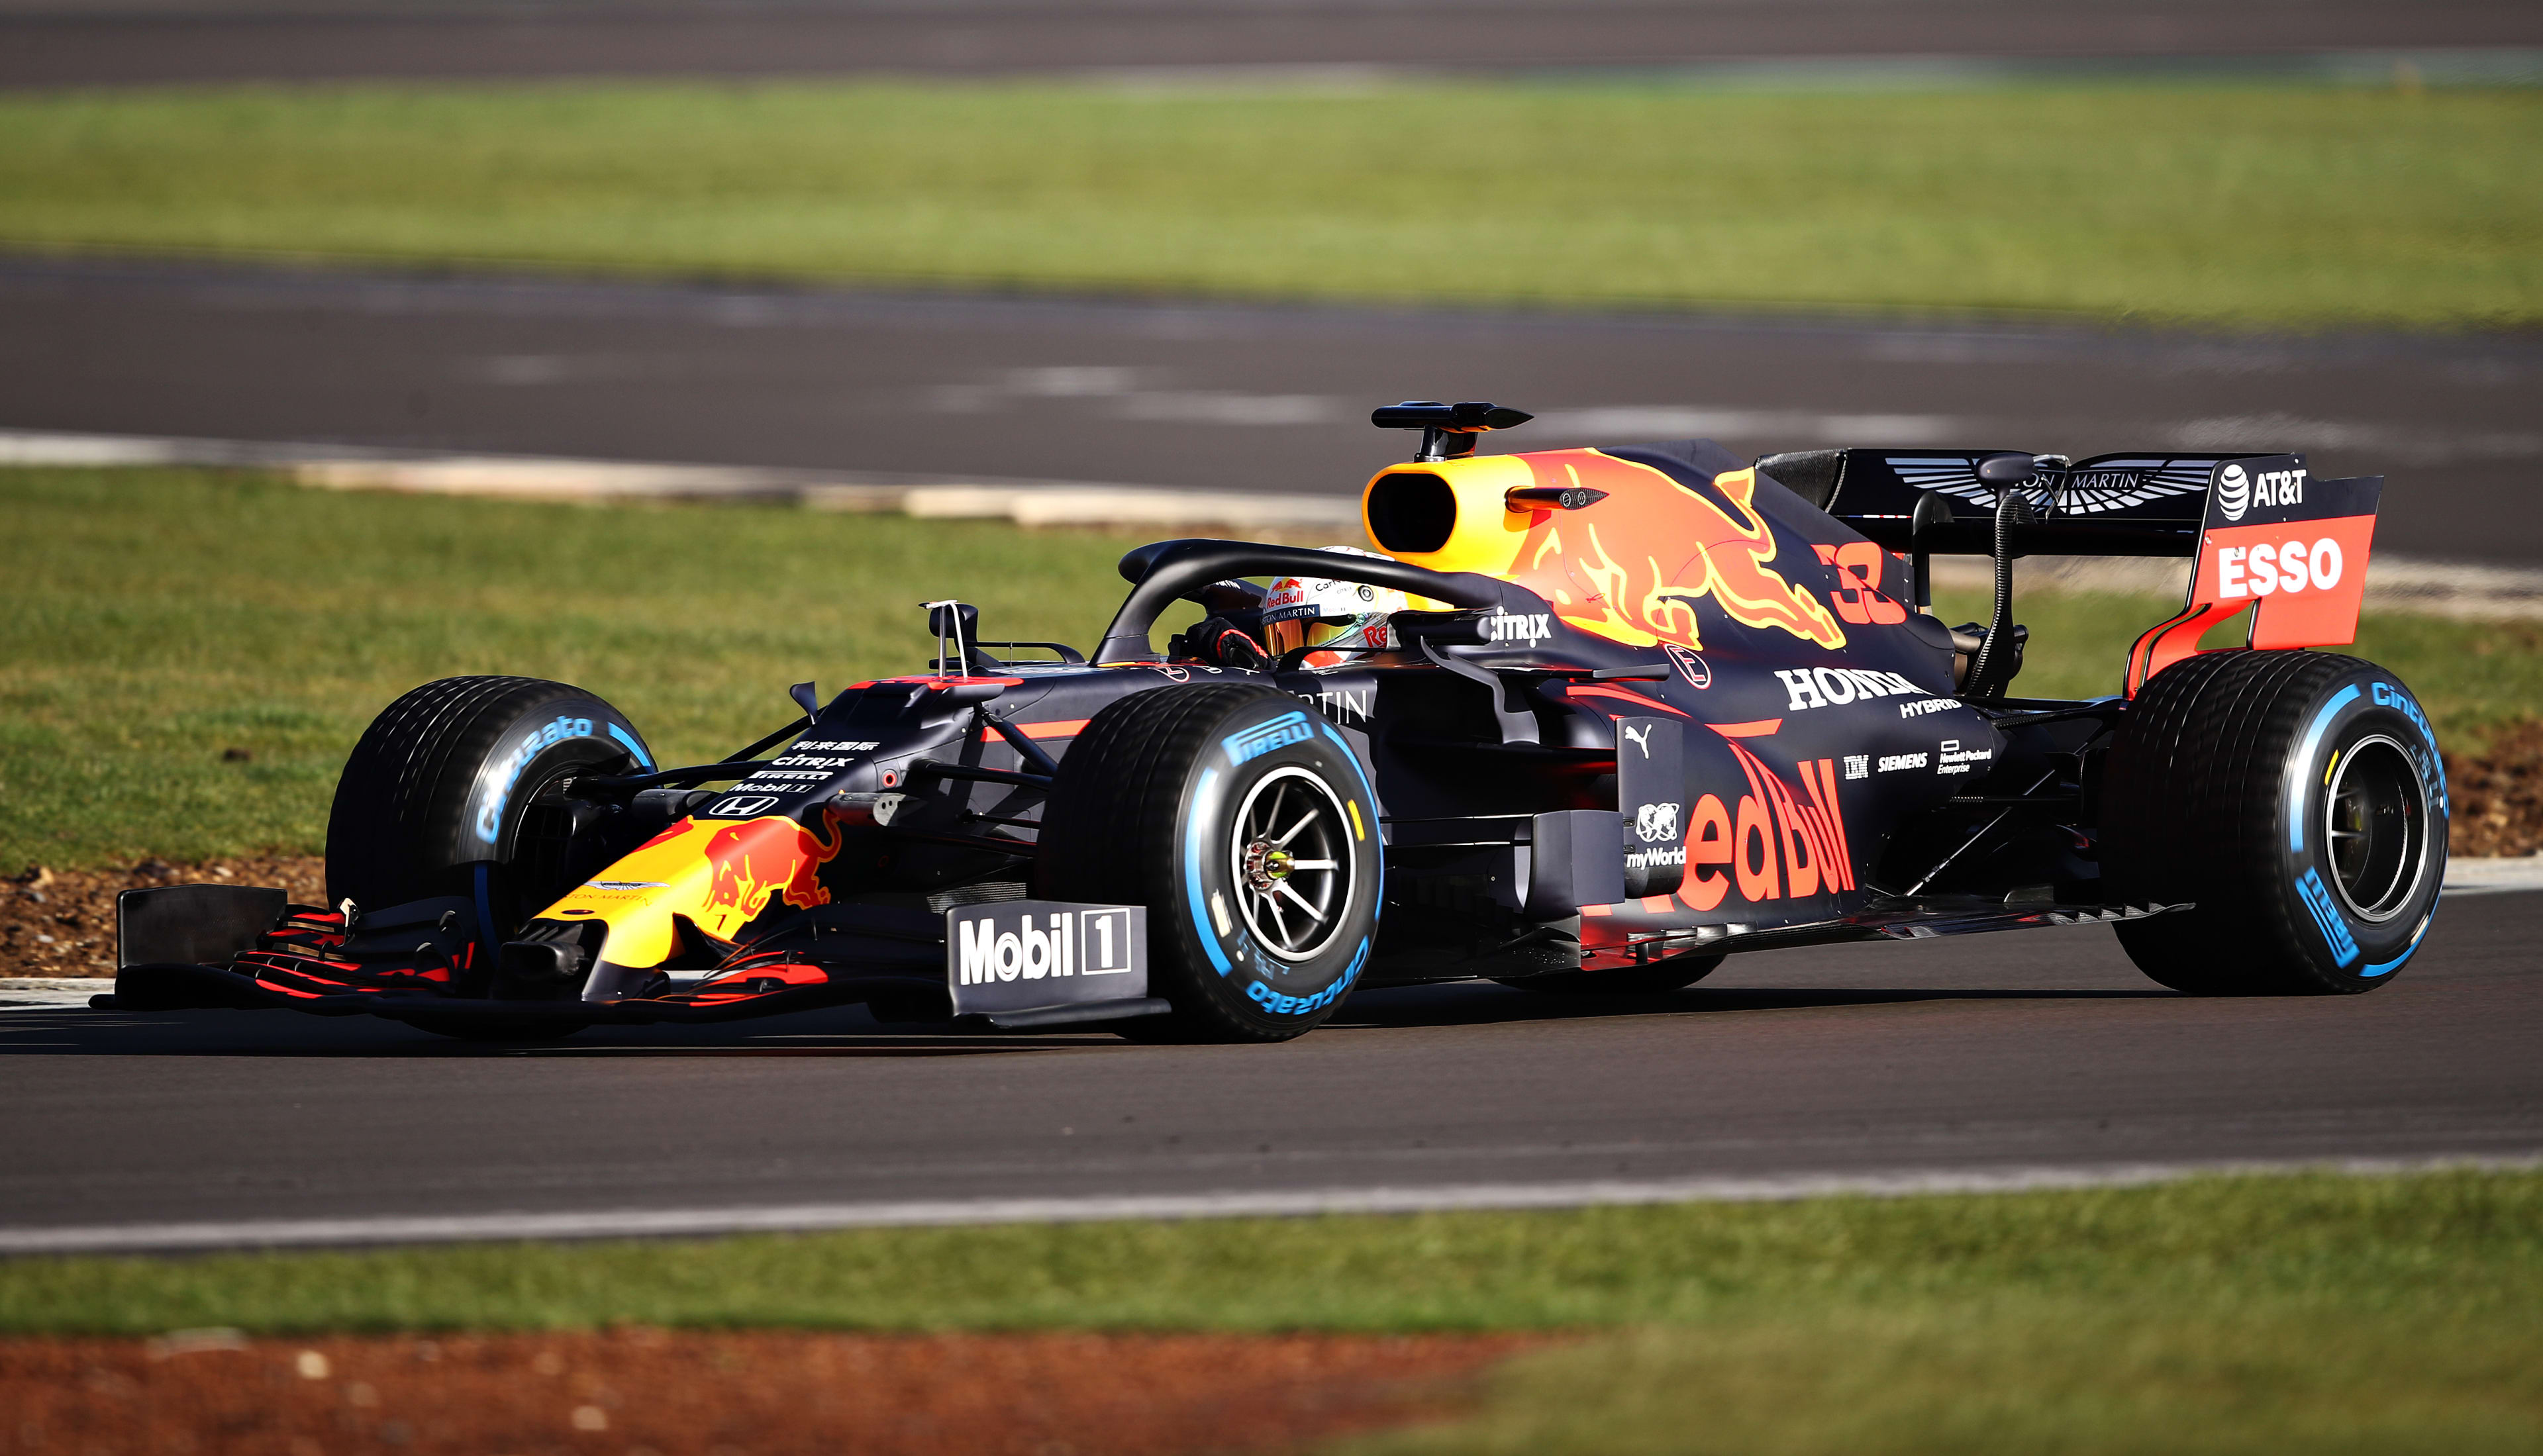 Max Verstappen F1 Driver for Red Bull Racing